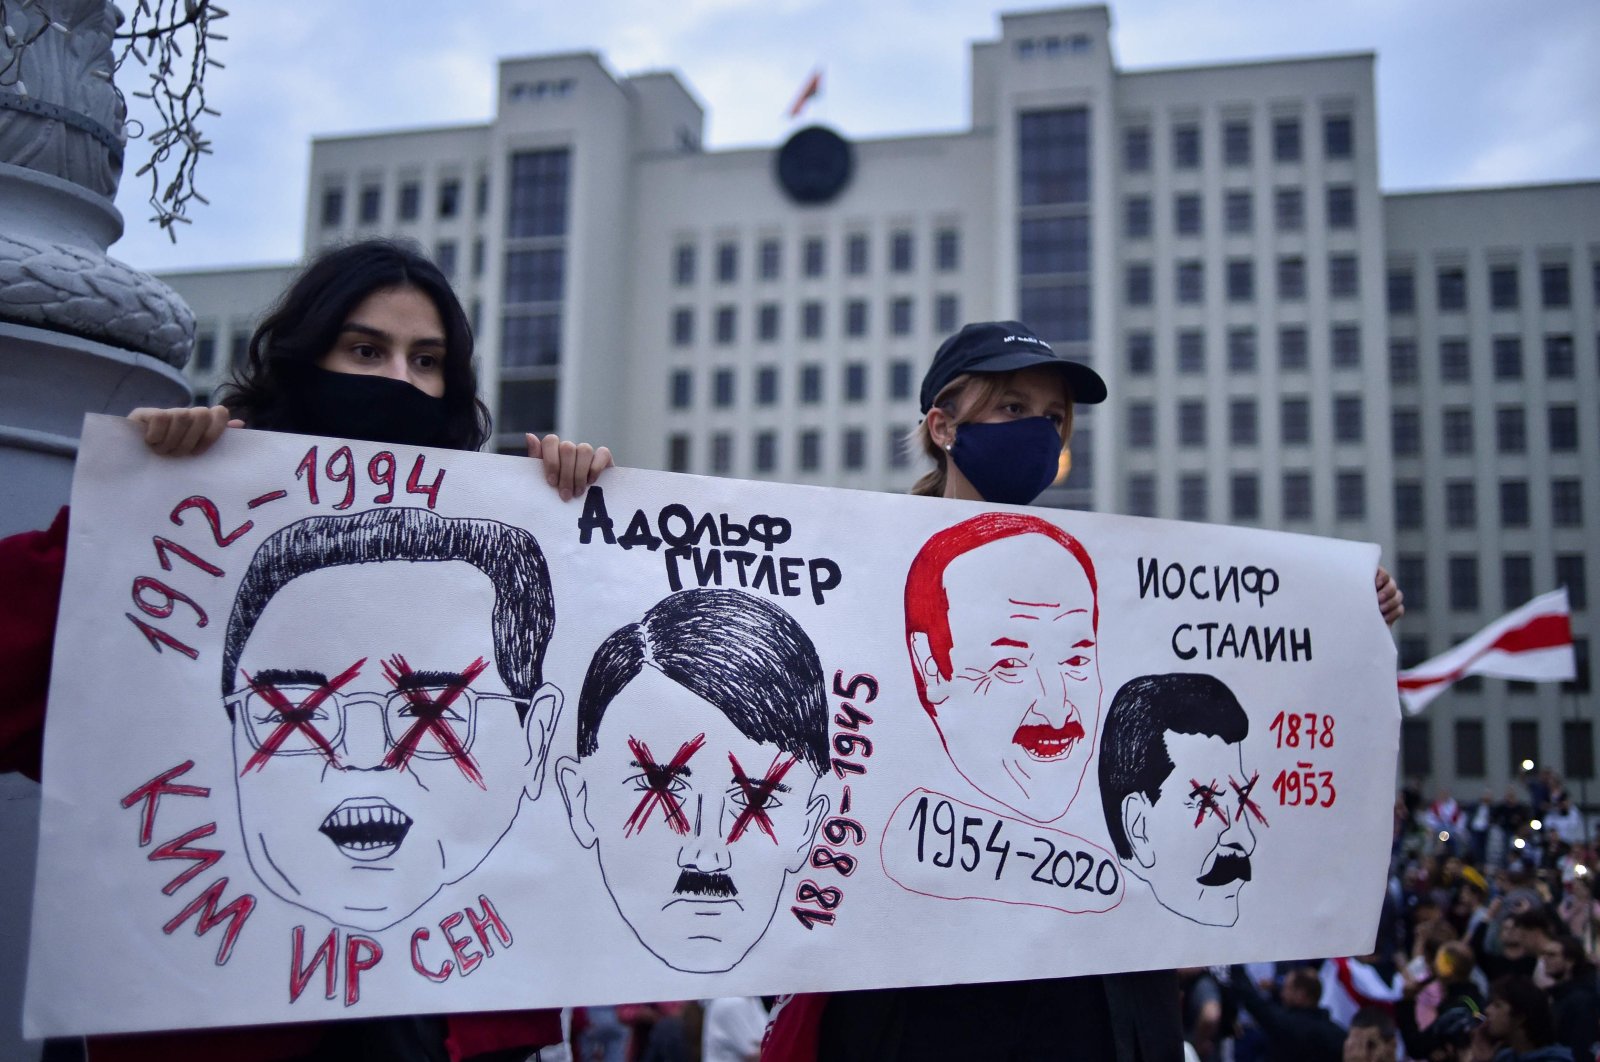 Women hold a placard with drawings of Kim Il Sung, Adolf Hitler, Alexander Lukashenko and Joseph Stalin during a rally to protest disputed presidential election results on Independence Square, Minsk, Belarus, Aug. 20, 2020. (AFP Photo)